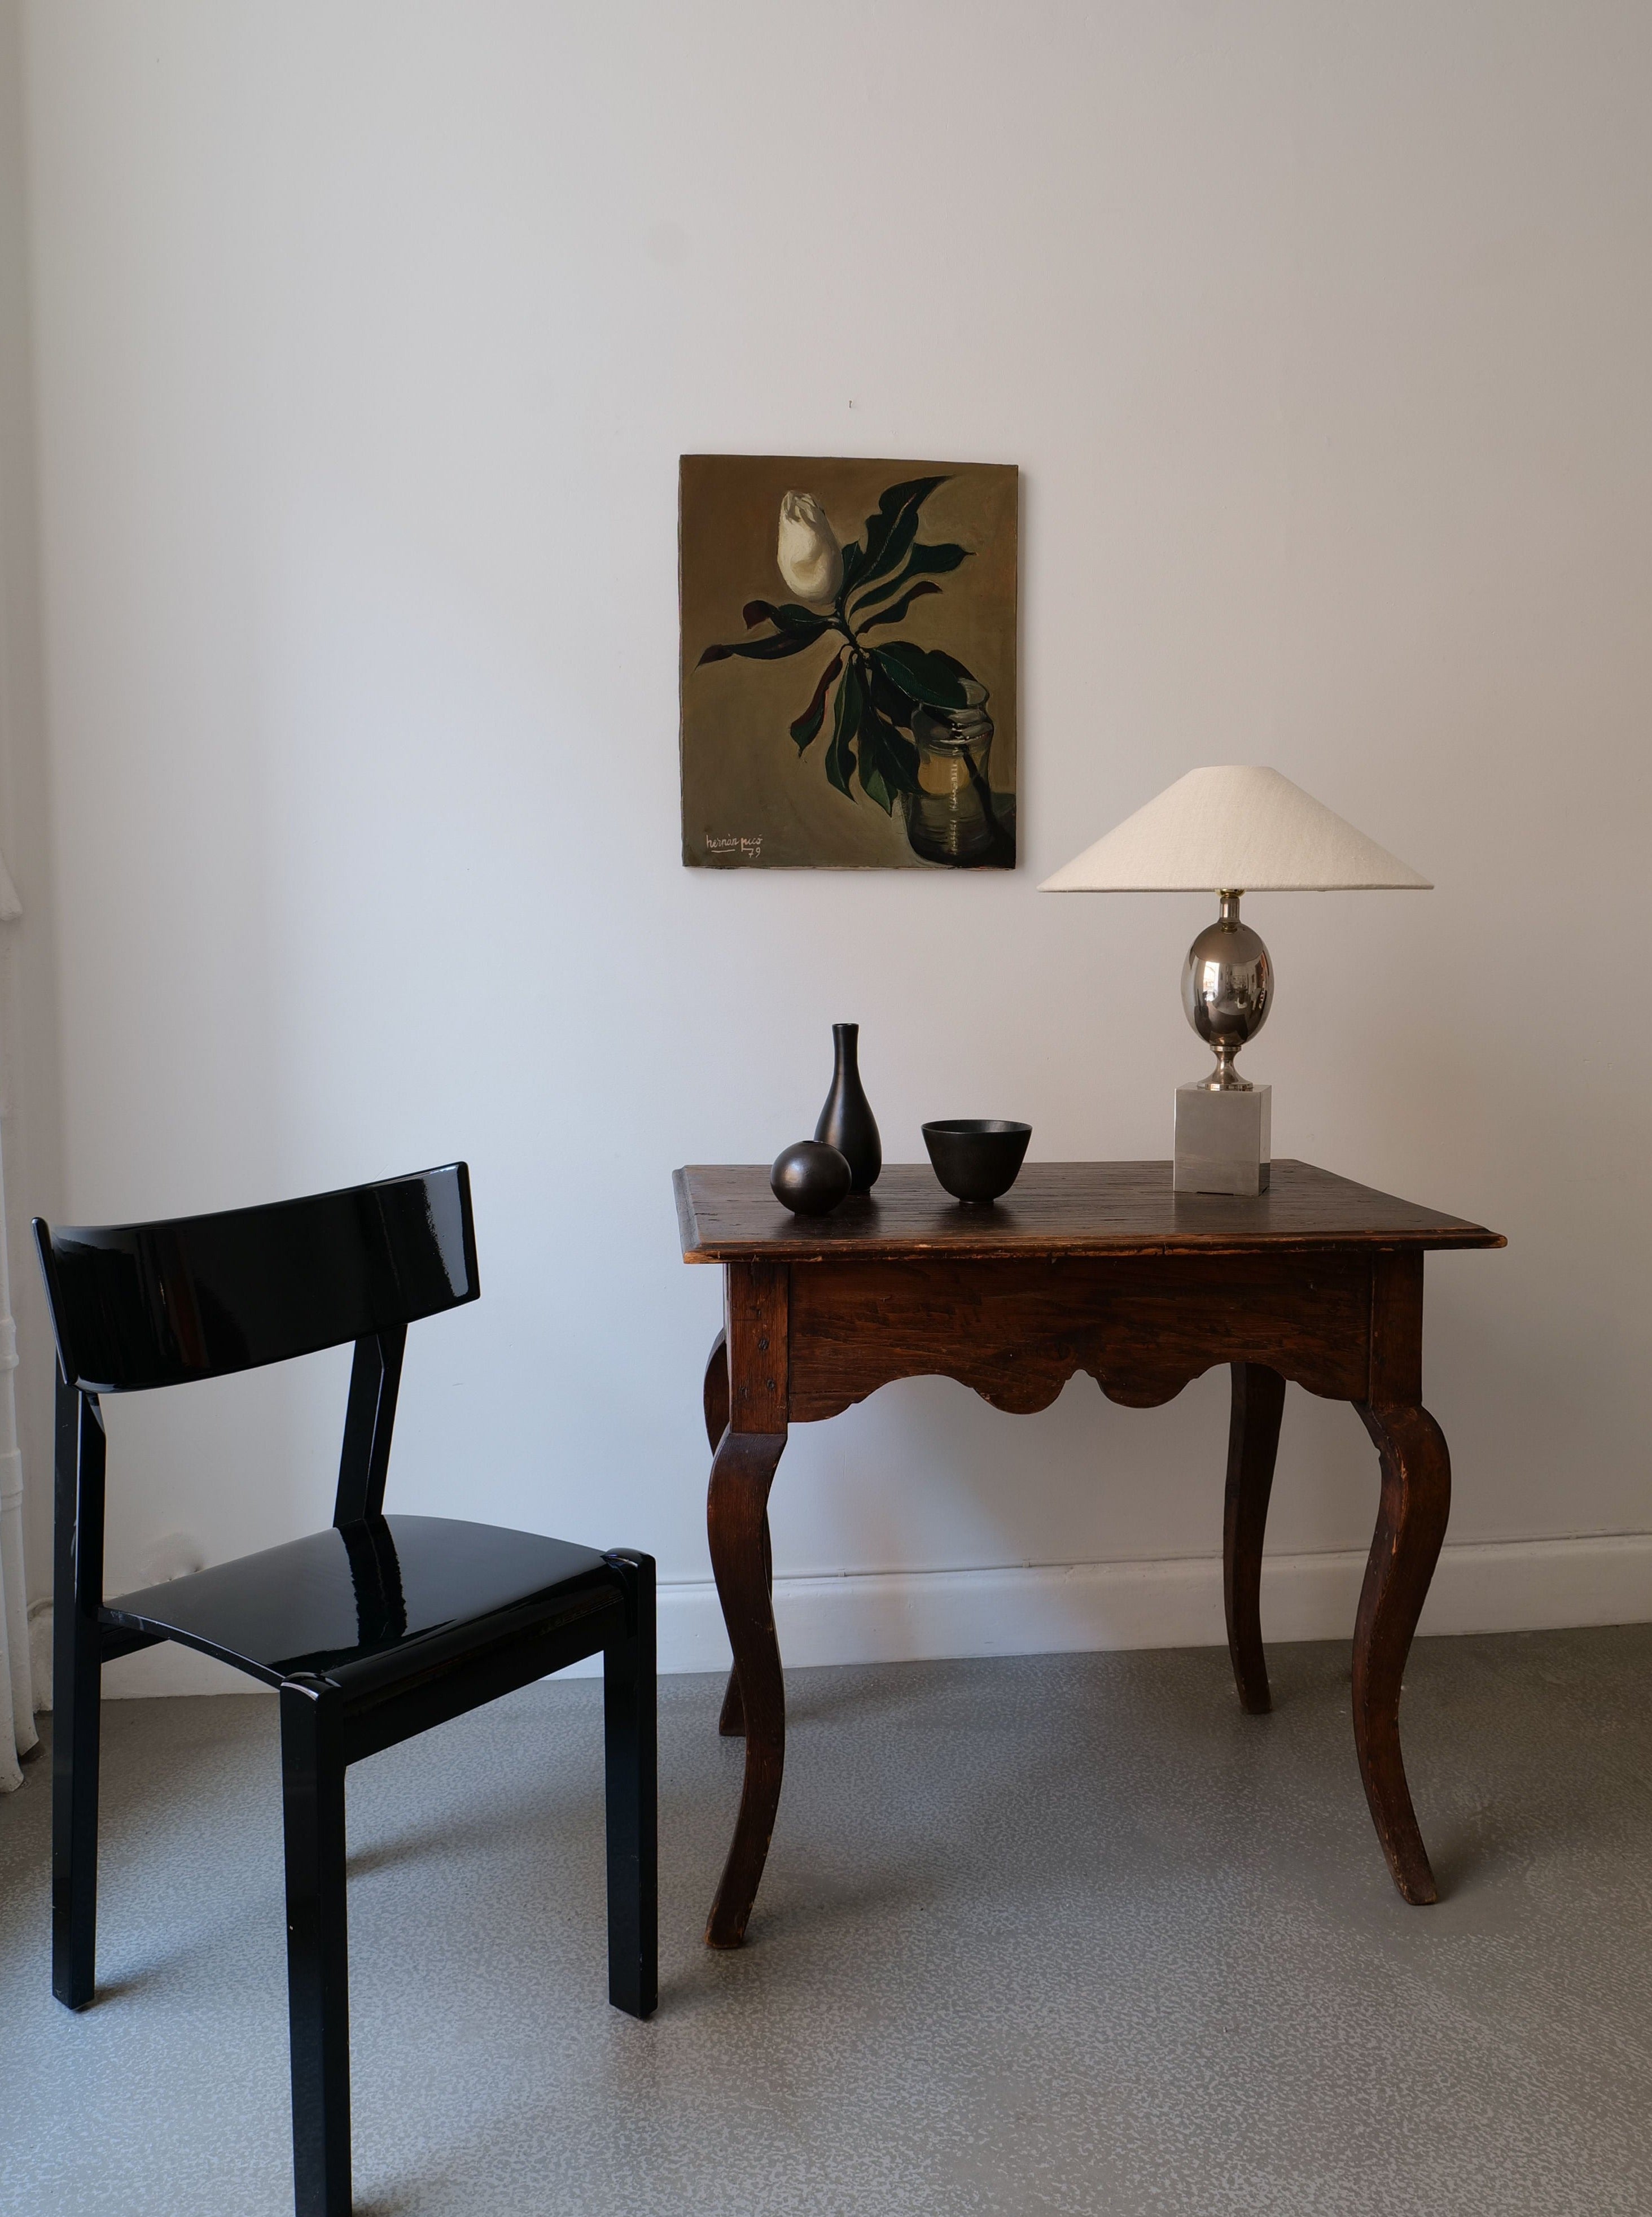 A simple interior setting featuring a dark wooden chair beside an antique wooden table with a sleek table lamp and two decorative vases. There is a Collection apart Magnolia Grandiflora 1979 on canvas floral painting on the wall above the table.